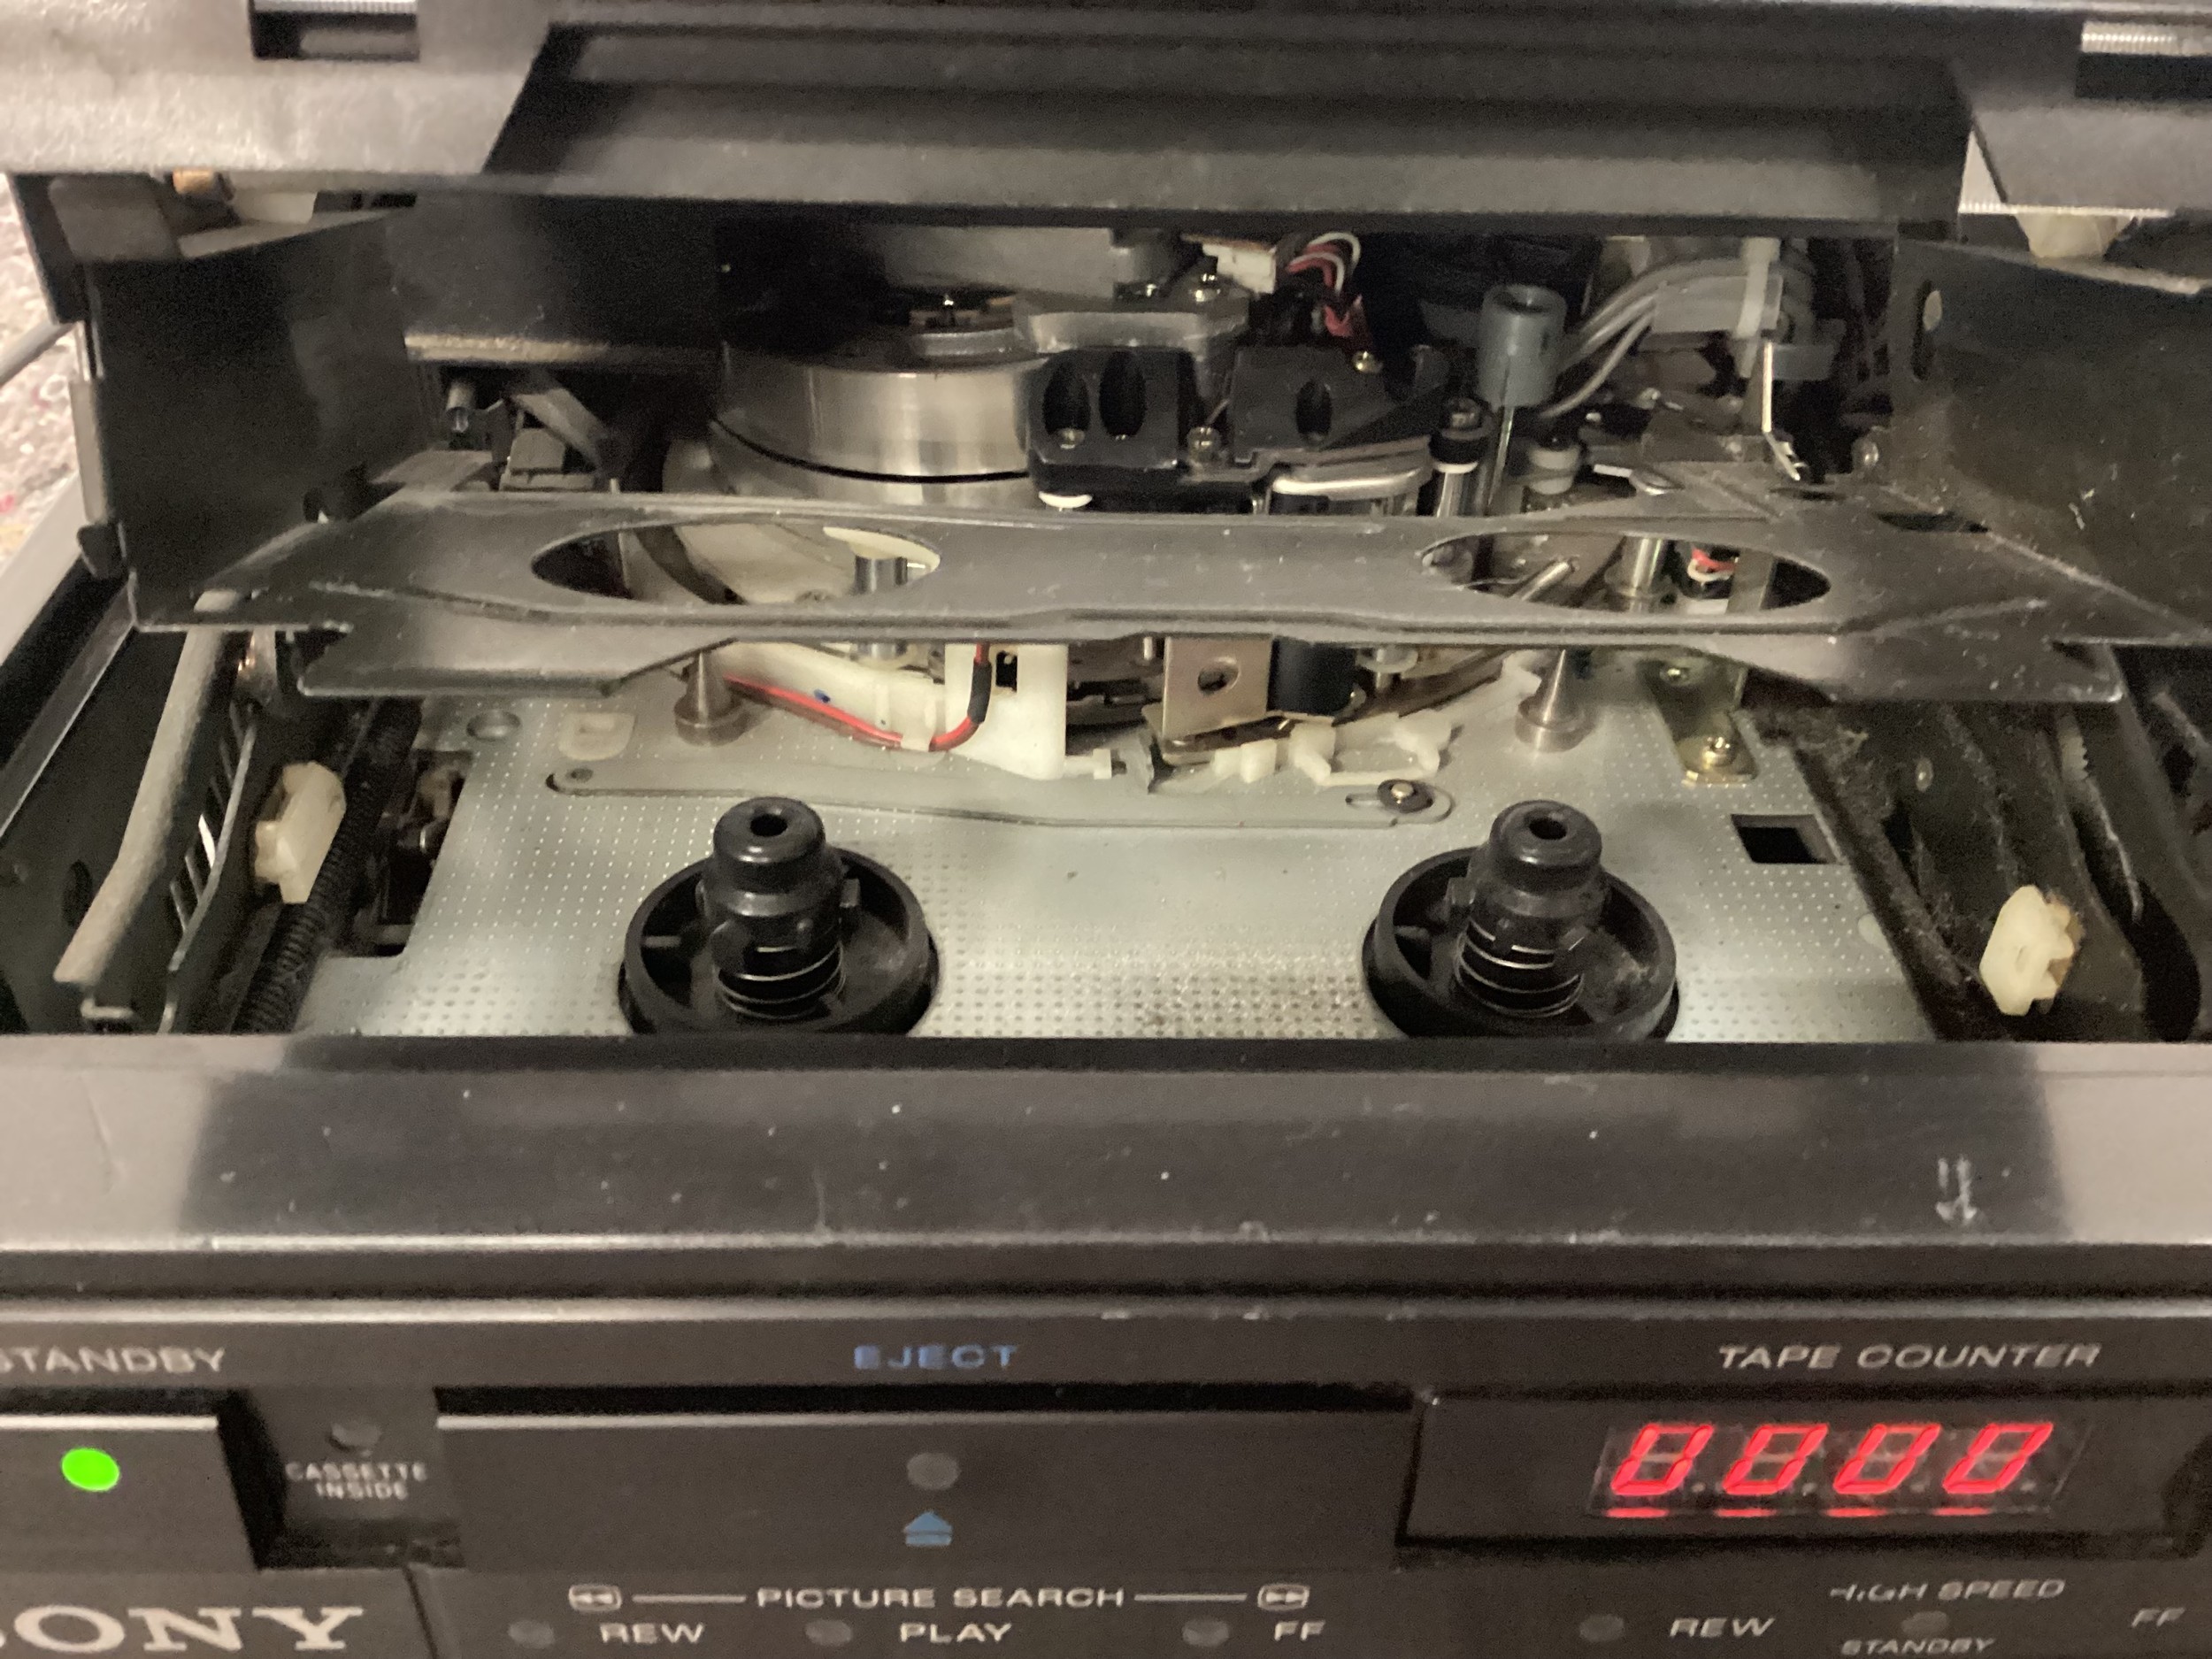 SONY BETA HIFI VIDEO CASSETTE RECORDER. Nice professional Pal stereo cassette recorder found here - Image 4 of 5